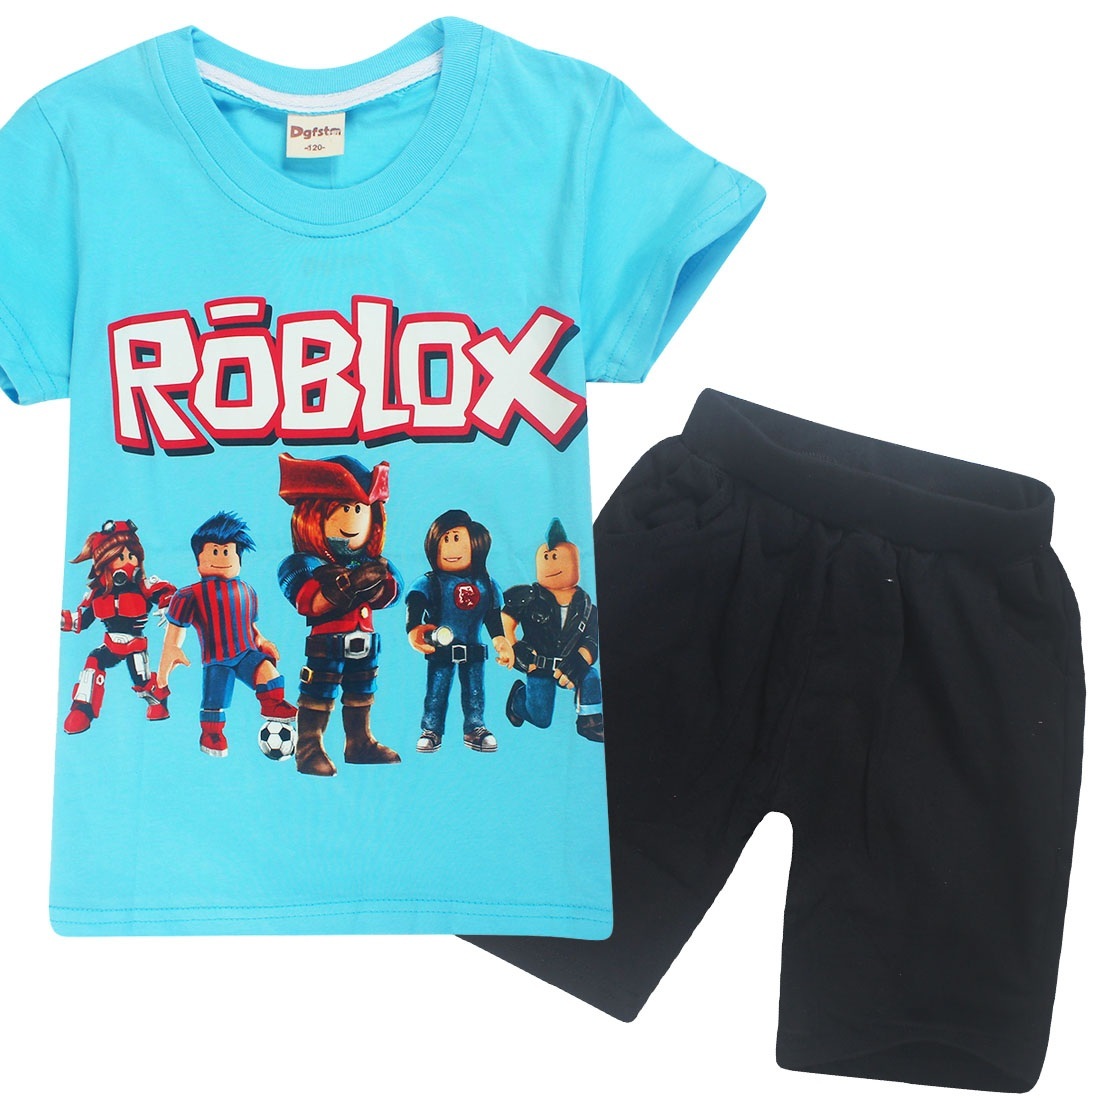 Roblox Theme New Arrival Green Kids T Shirt And Similar Items - green roblox t shirt